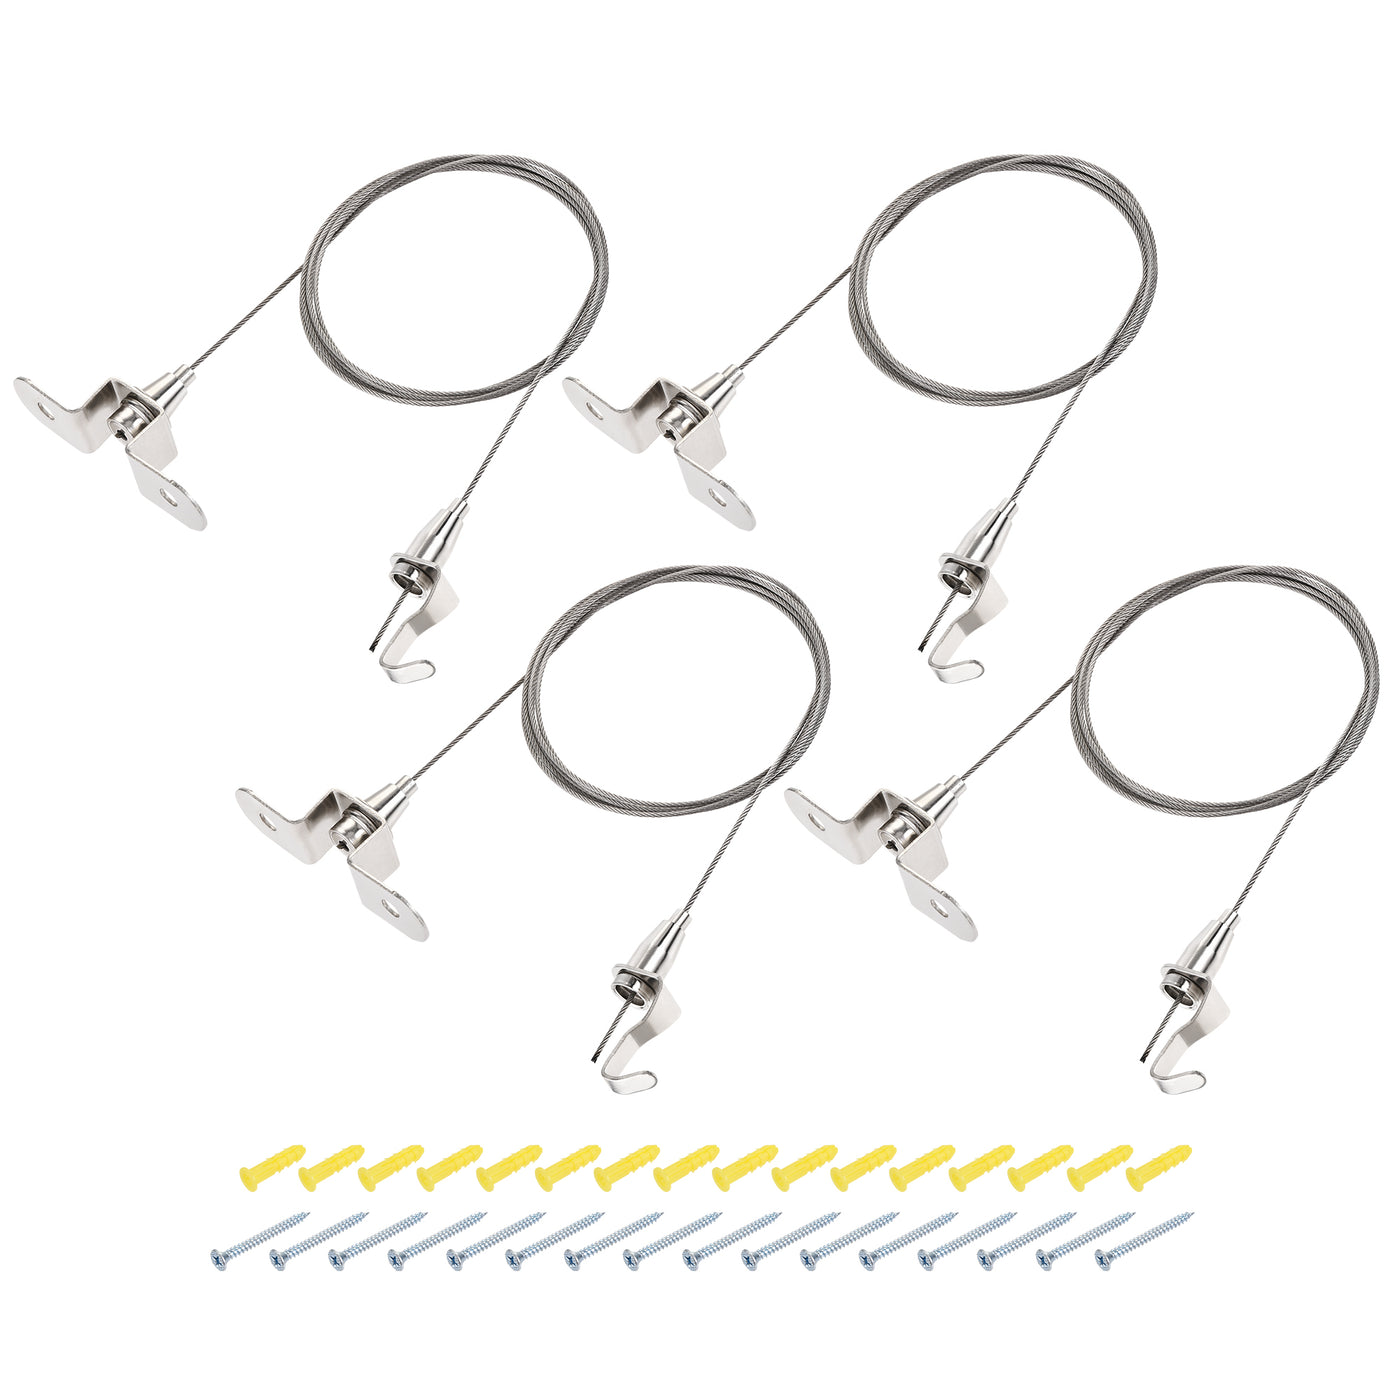 uxcell Uxcell Picture Hanging Wire Kit, 4Set 2M Adjustable Sling Hanging System for Home Picture Art Gallery Picture Display Kit, Load 66 Lbs, with Screws